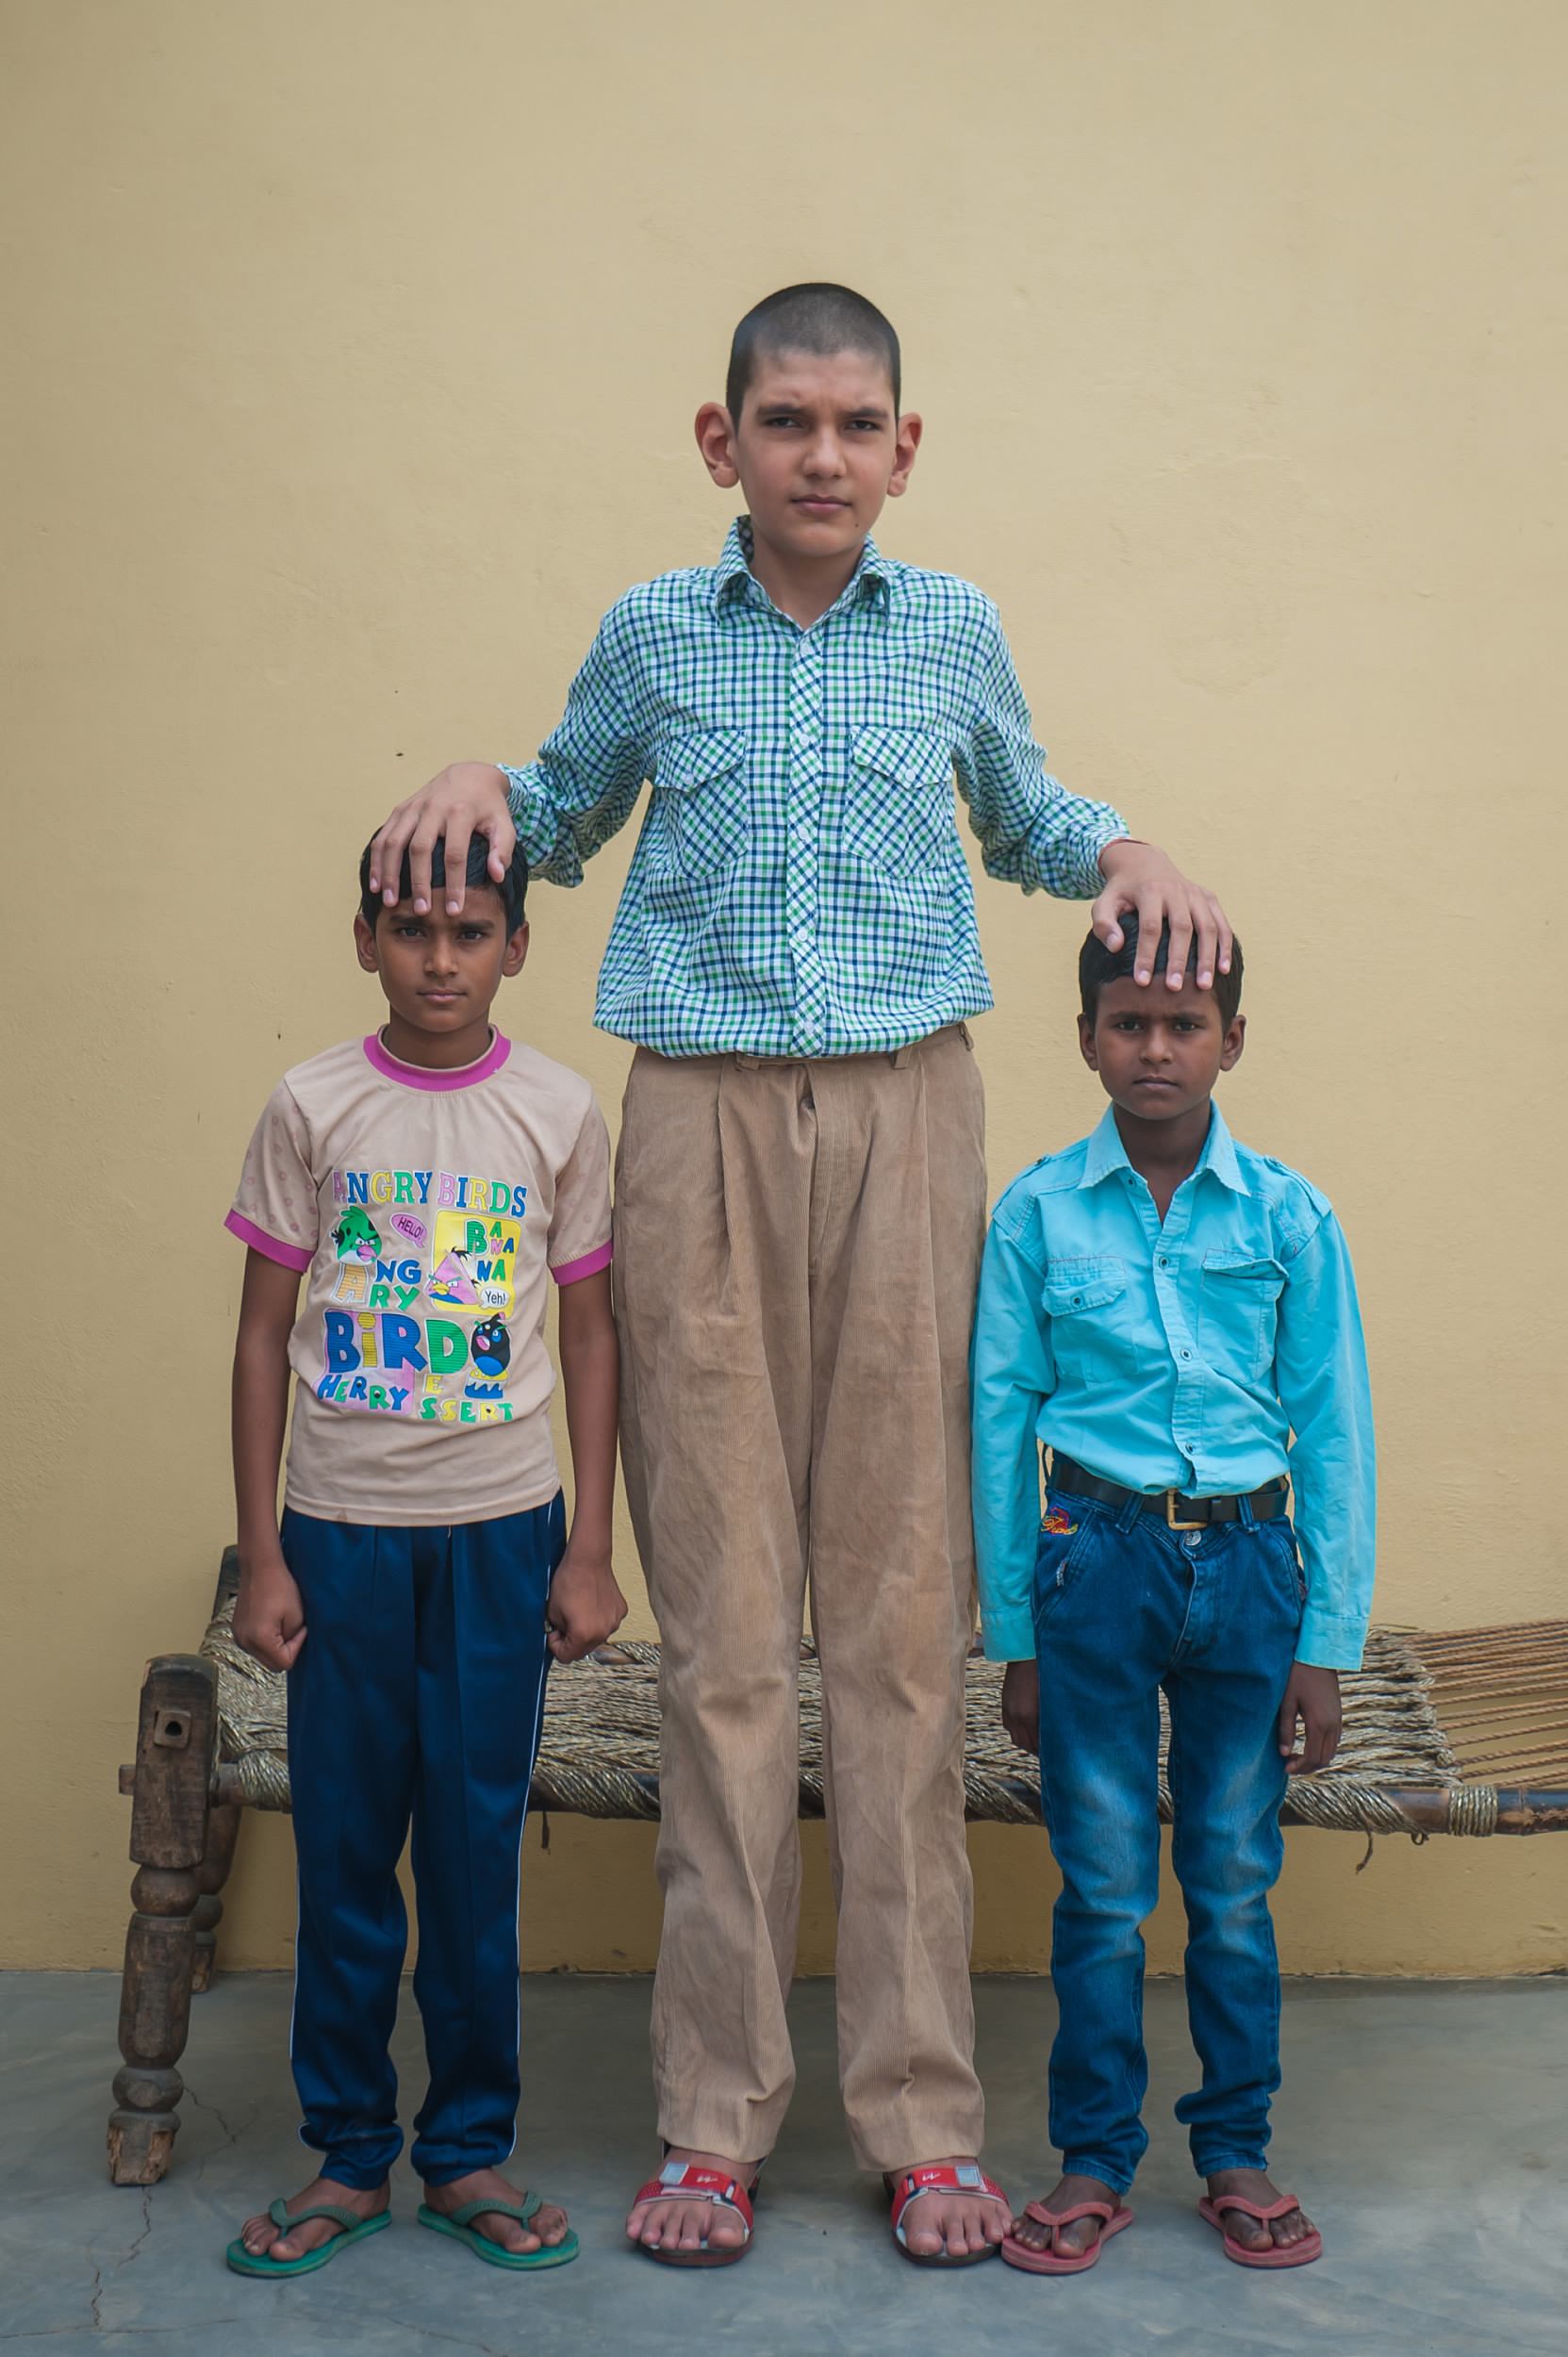 Meet the Indian boy who towers above his classmates at nearly 2 meters